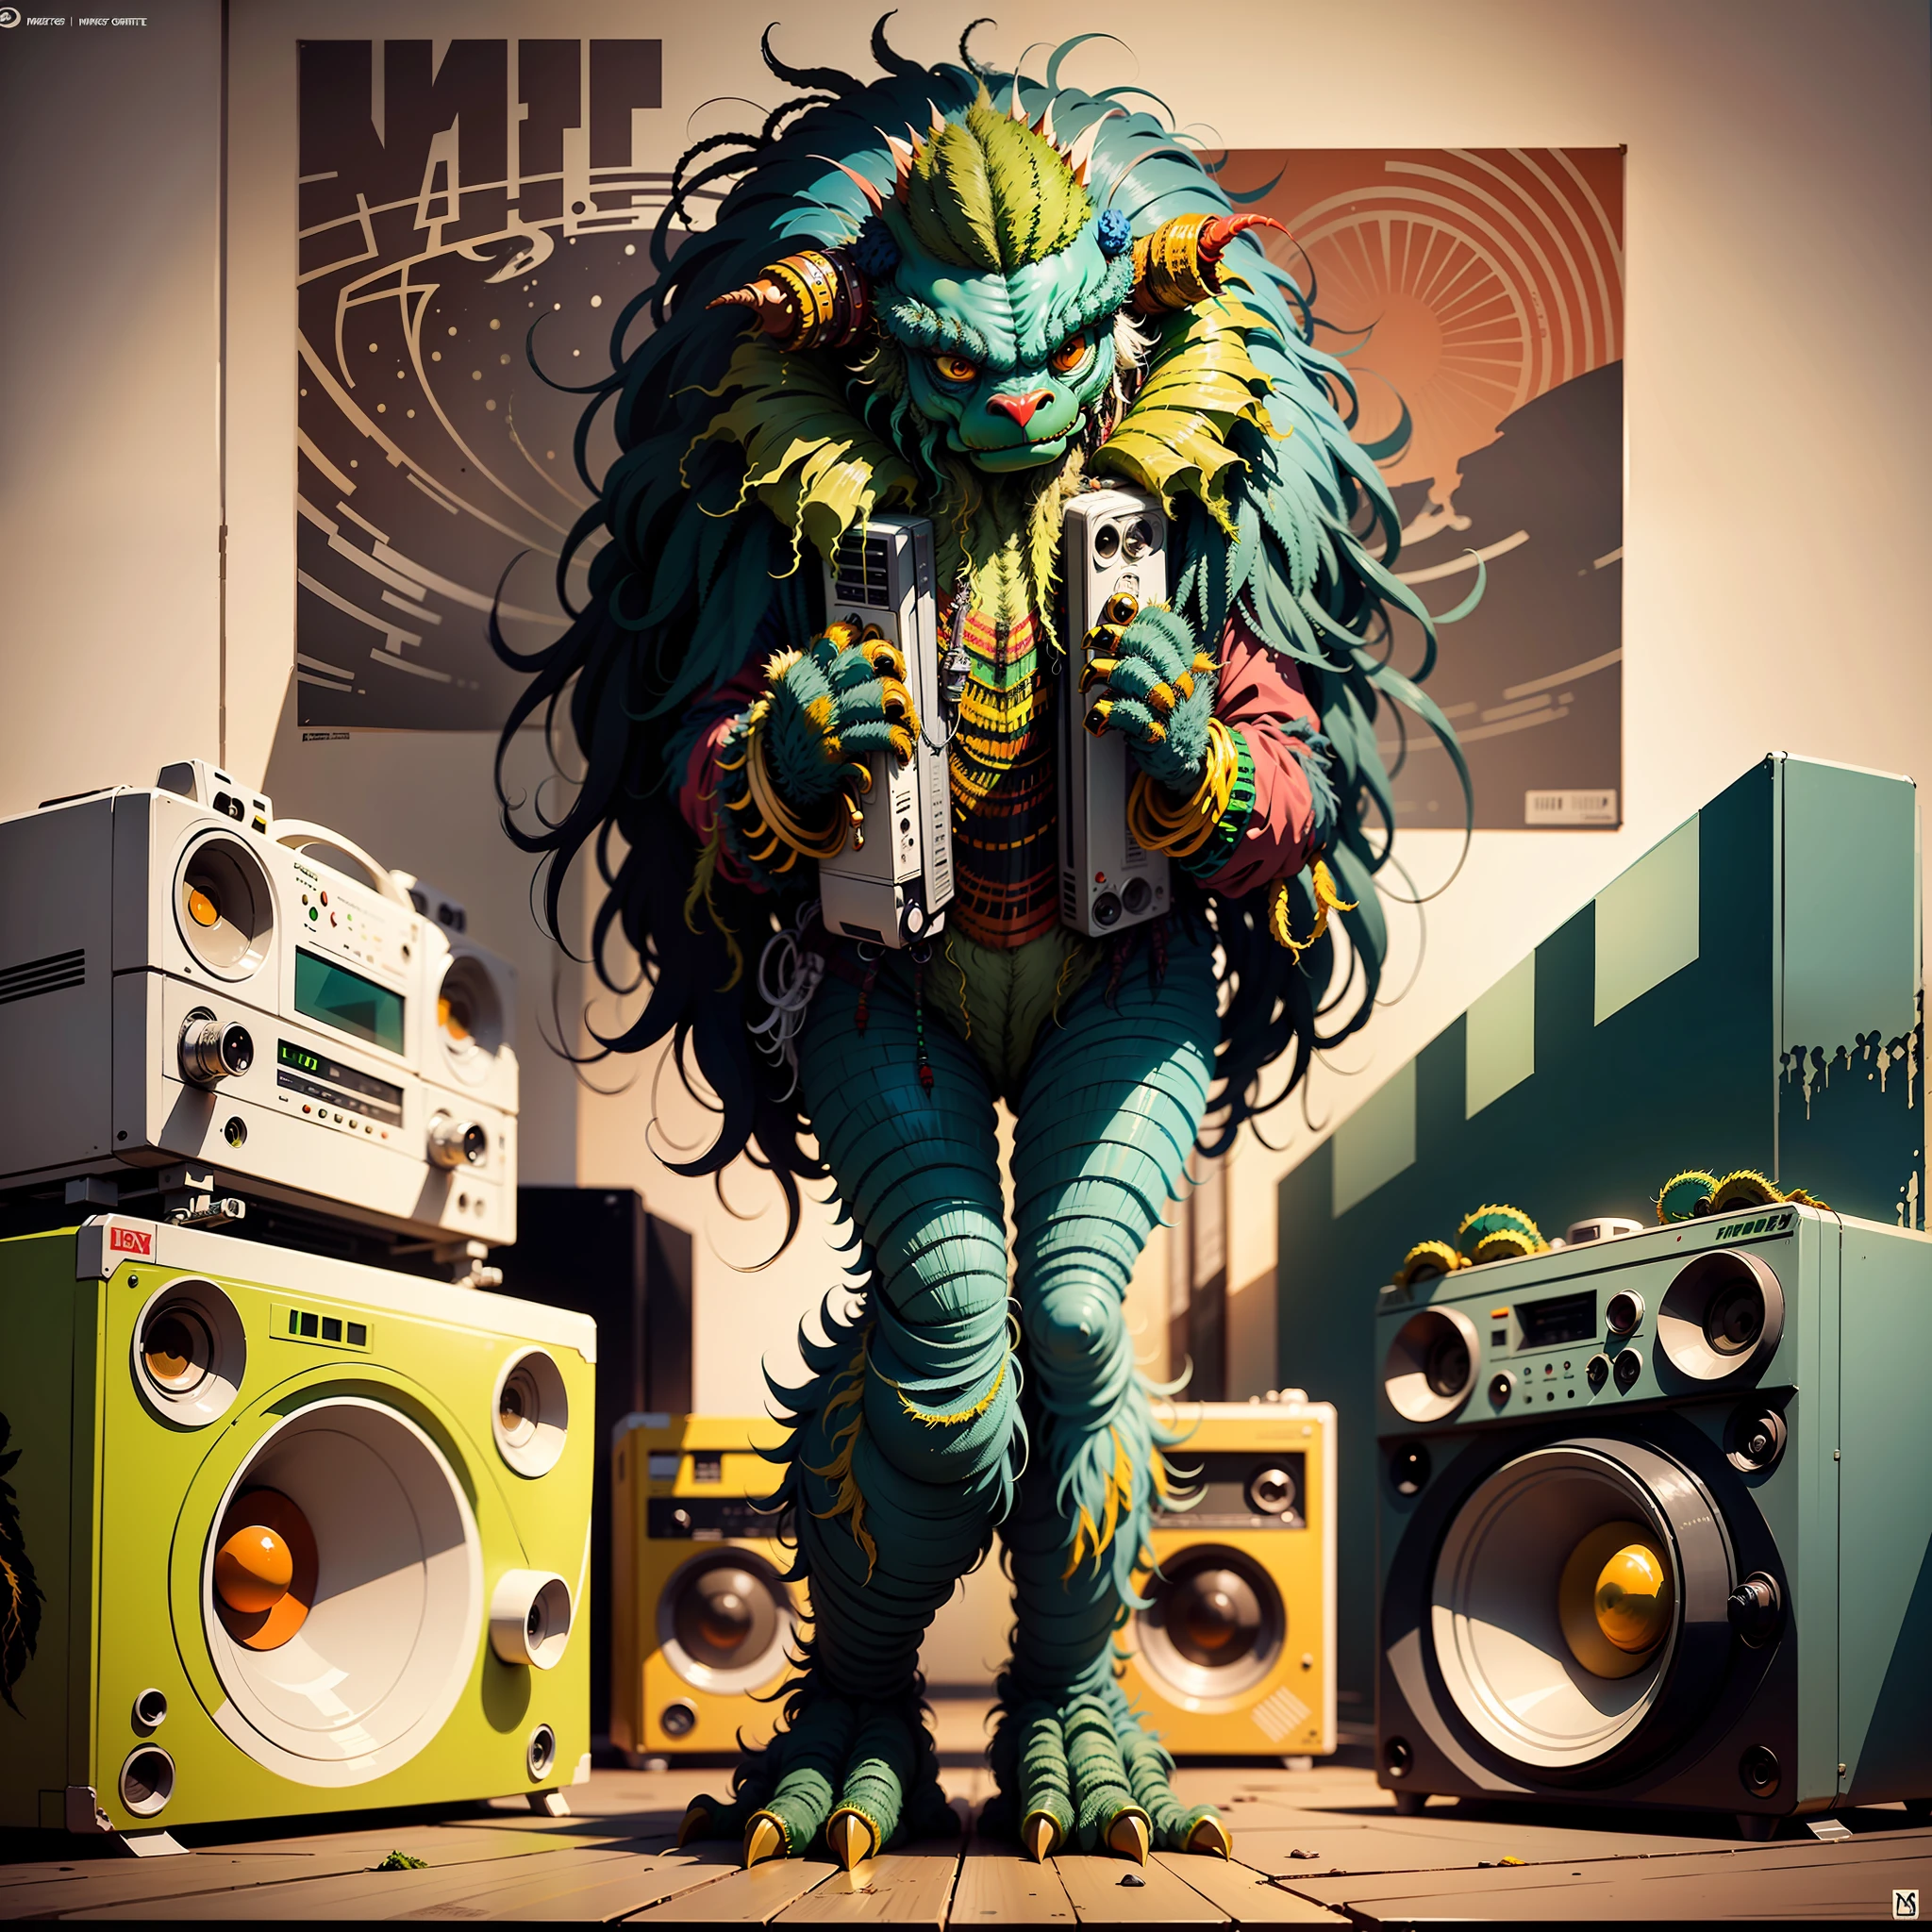 a ((((([rasta monster creature])))))), ( full body shot) holding a boombox, ghetto blaster, big ghetto blaster, tape deck, lofi hip hop, audio equipments, cassette, retro technology, nostalgic vibes, 1 9 6 0 s tech, radios, vintage, the 6 0 s, propaganda Poster style, Poster design, poster art style. 1970s, 1950s, 1960s, Very colourful poster, colour art, thirds rule, inspiring, 1970, lofi hip hop, high quality artwork, artwork, poster art style, promotional artwork, hiphop, 1 9 th, print, high quality wallpaper, poster artwork, style of shepherd fairey, in a retro or vintage style, reminiscent of classic advertisements or posters. Use warm and muted colors, capturing the nostalgic feel of vintage artwork, bird's eye view